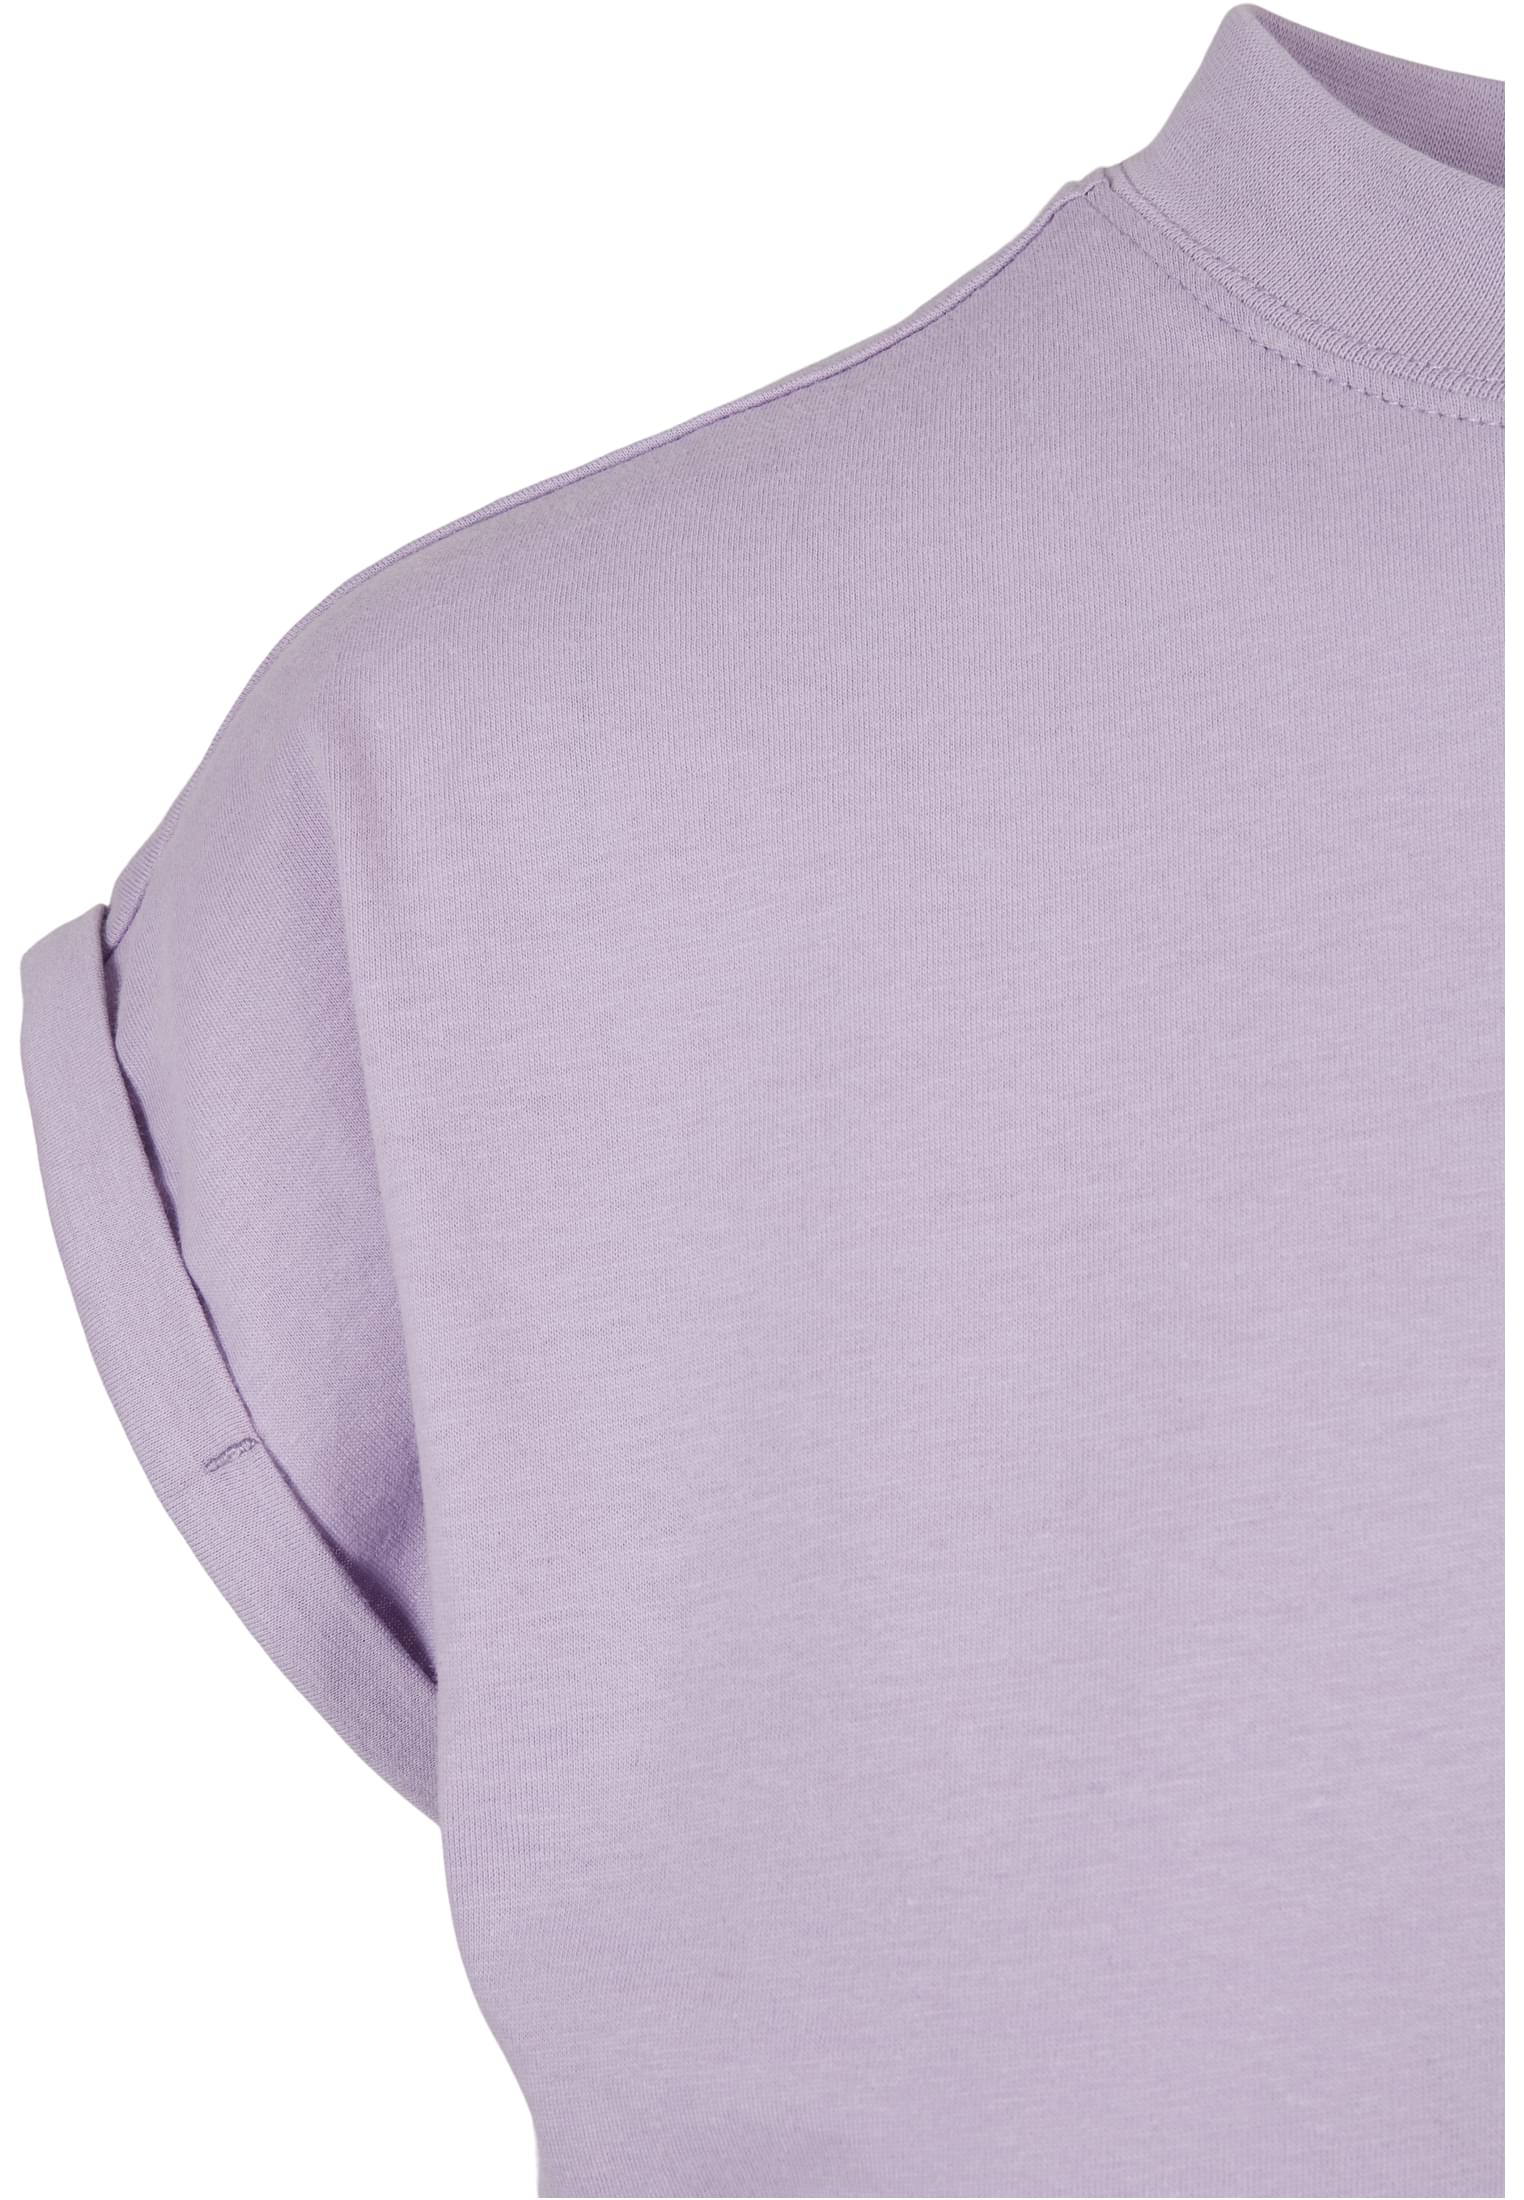 Frauen Ladies Turtle Extended Shoulder Dress in Farbe lilac